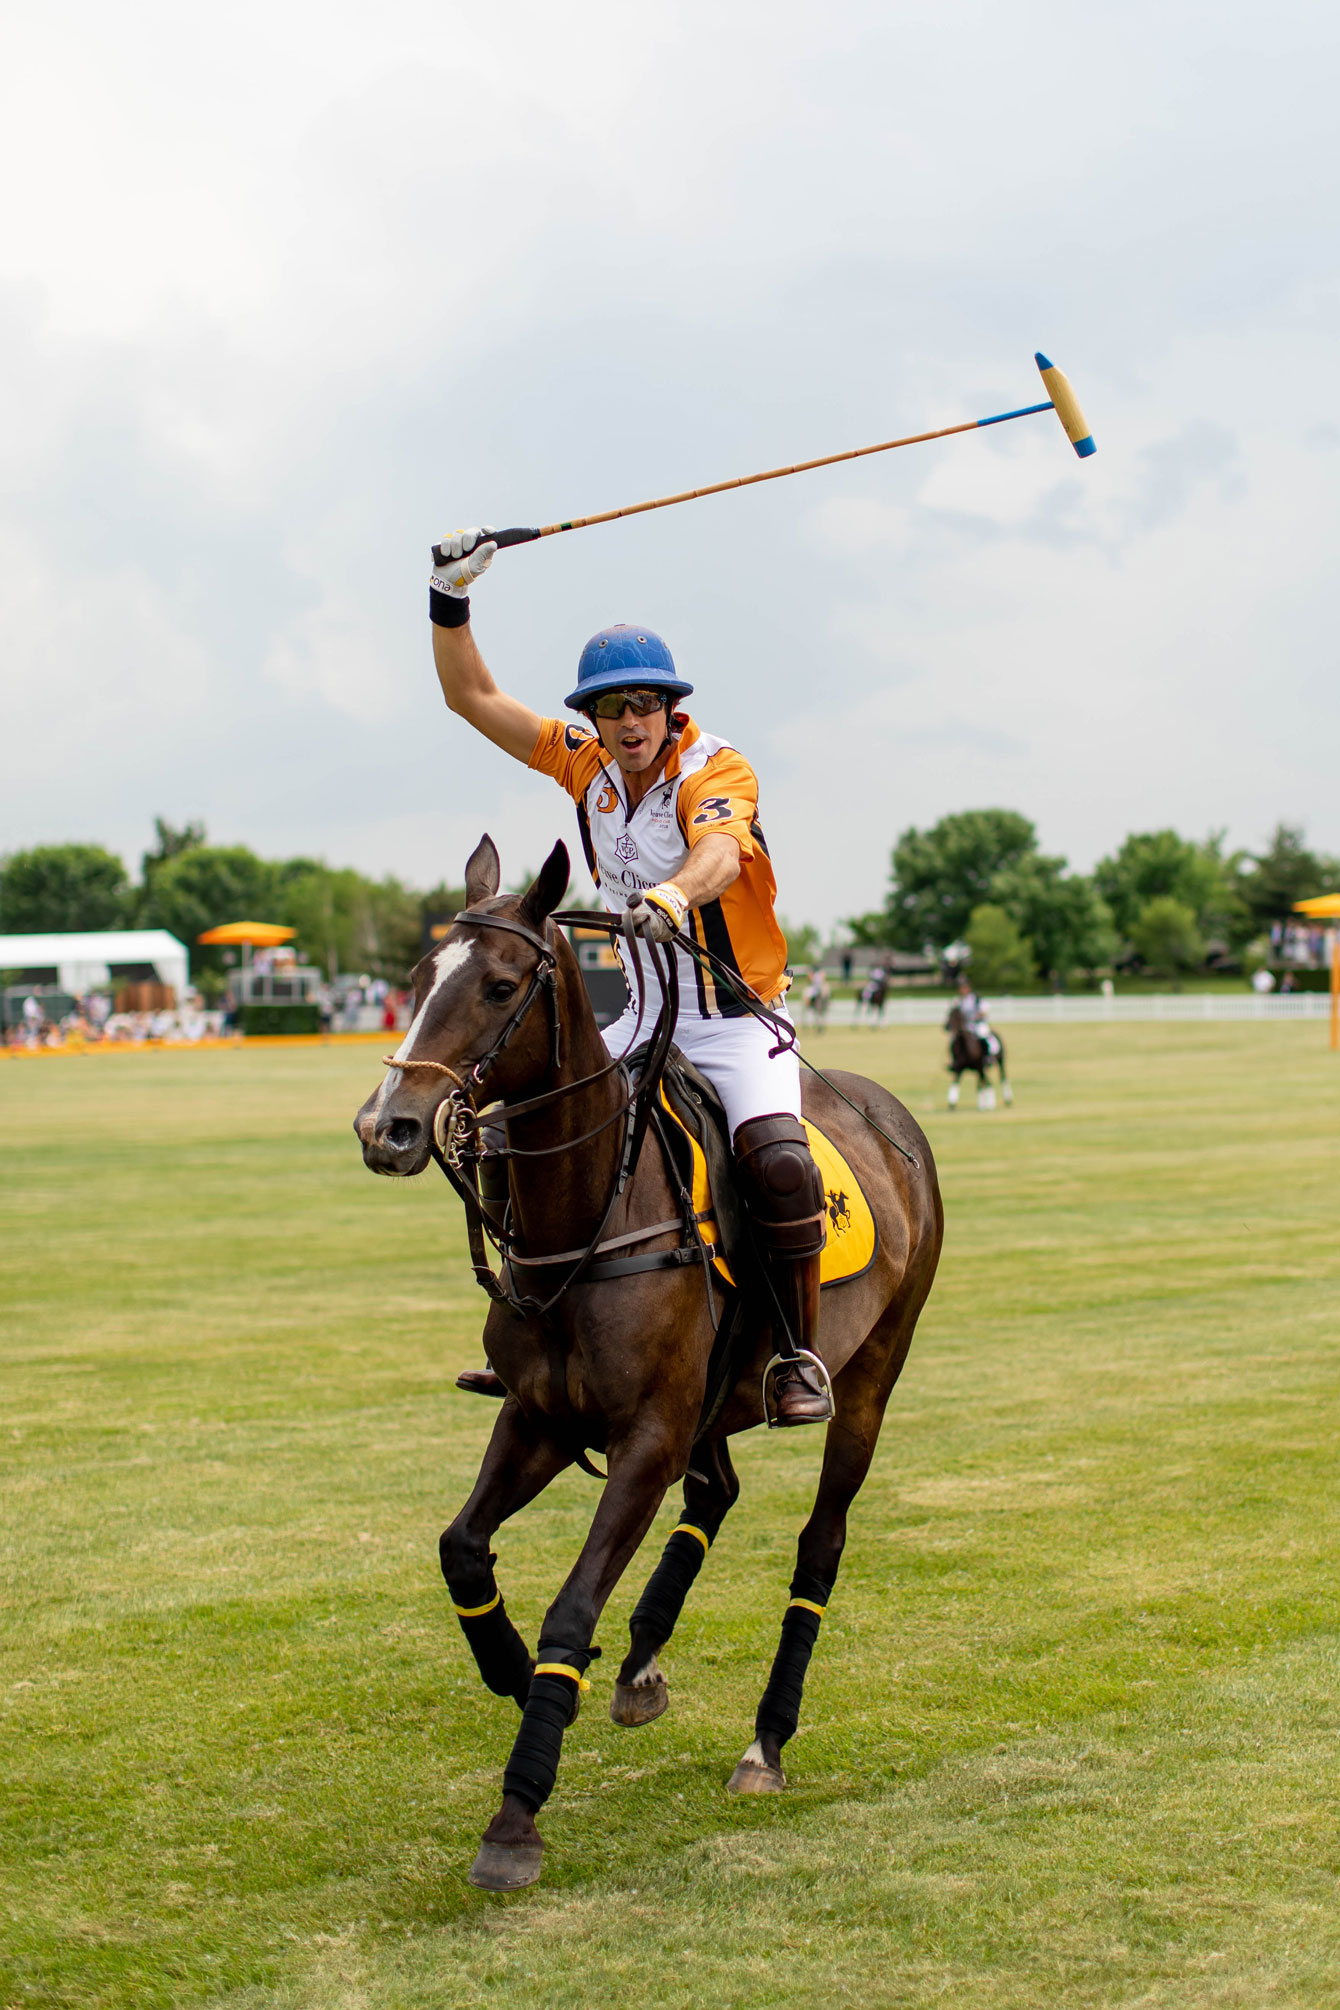 Upcoming Trip - Veuve Clicquot Polo Classic NYC 2020